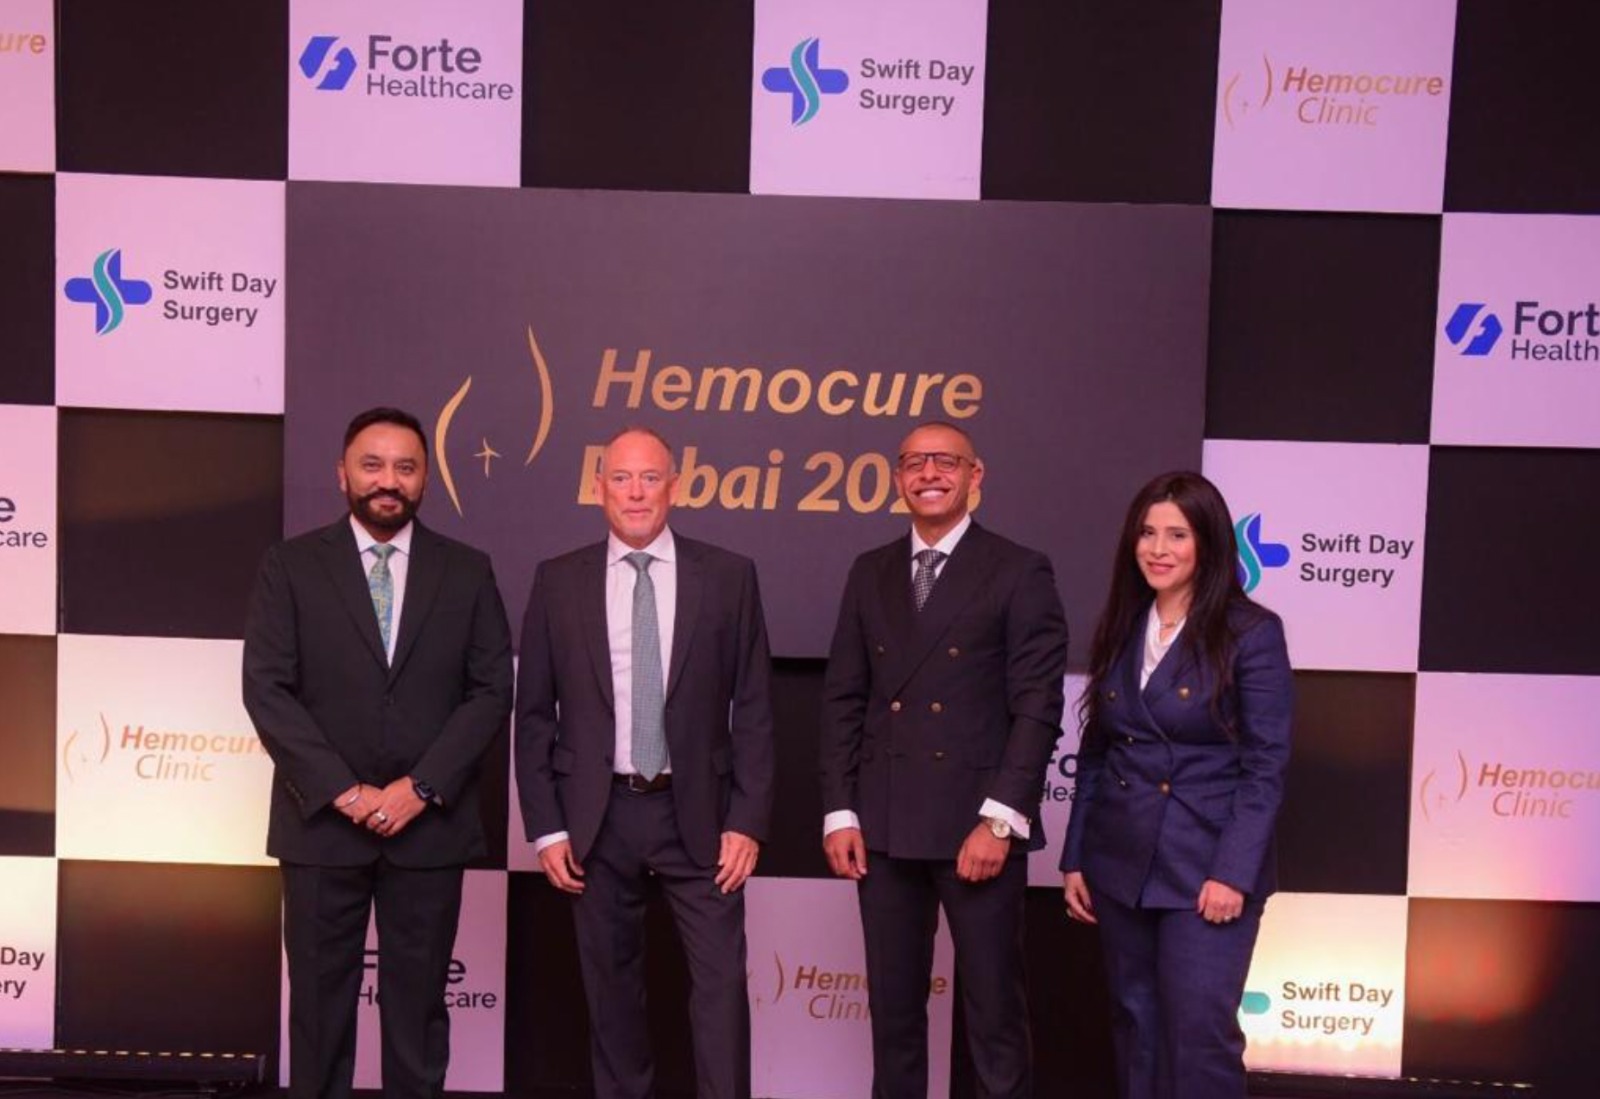 (Left to right) Mr. Karan Rekhi from Forte Healthcare, Mr. Detlev Berndt, Managing Director from Swift Day Surgery, and Dr. Mohammed Magdy CEO of Hemocure. 